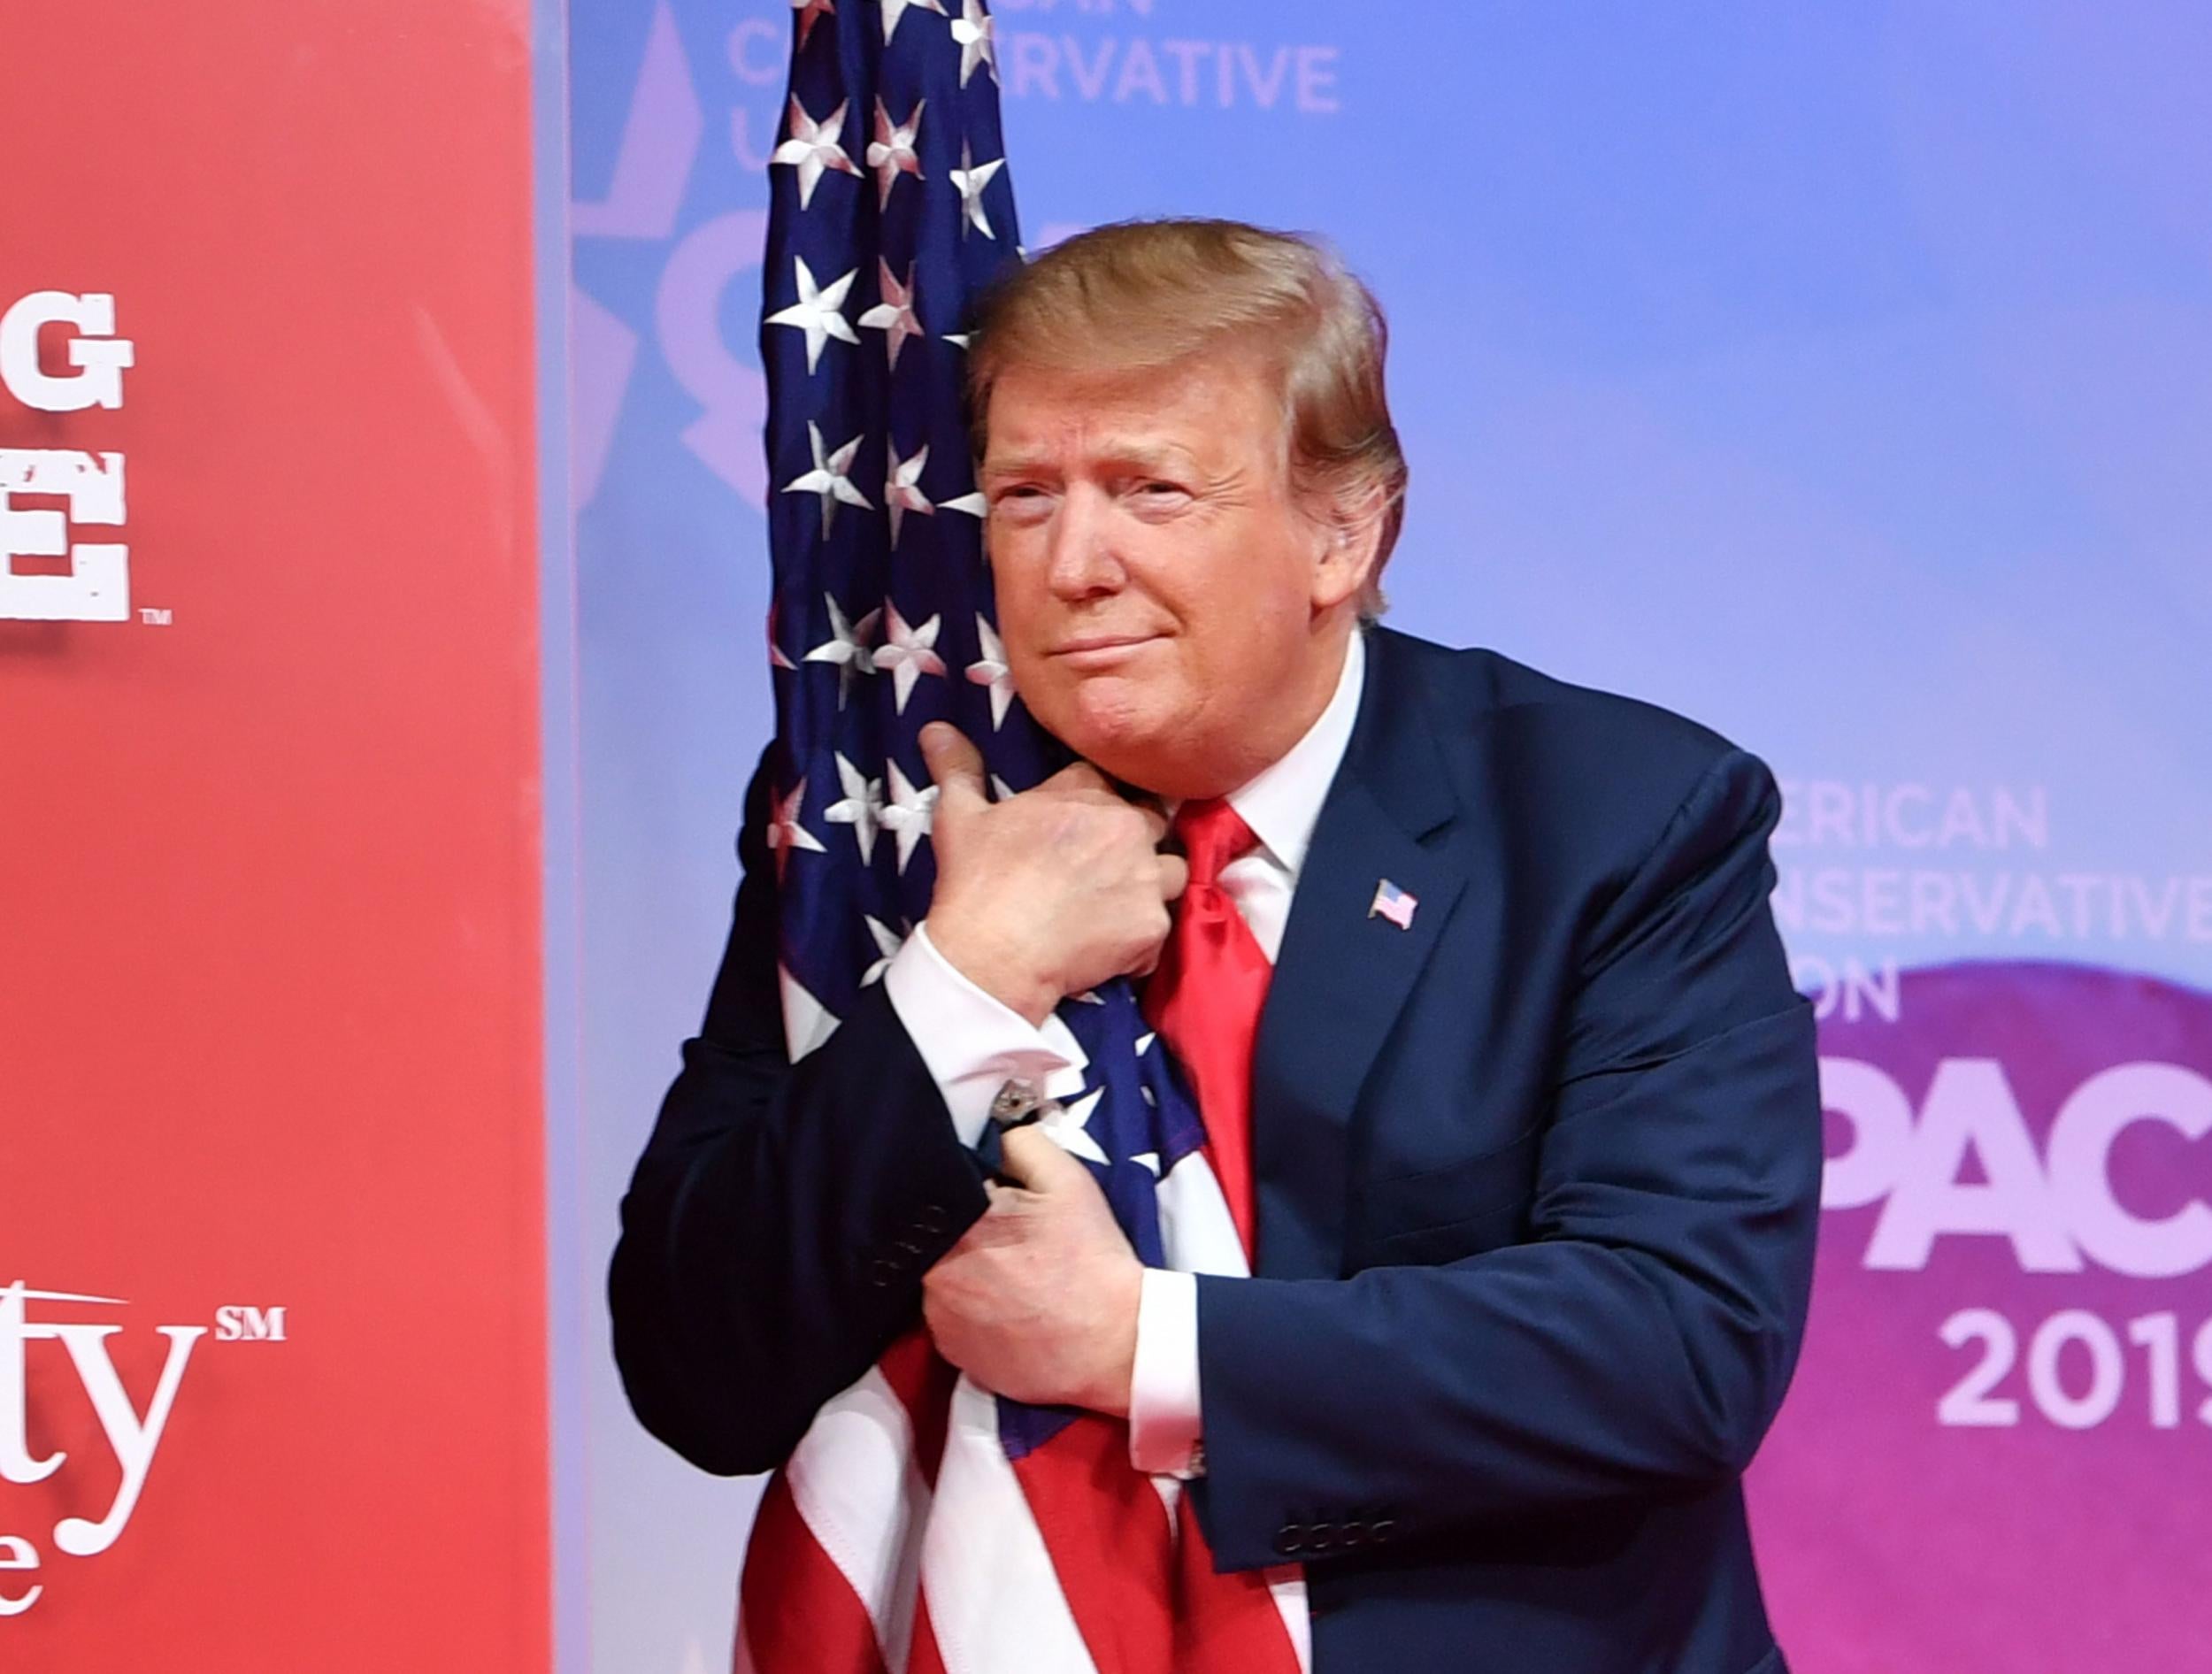 Whoever you vote for in 2020, don't forget what real patriotism looks like